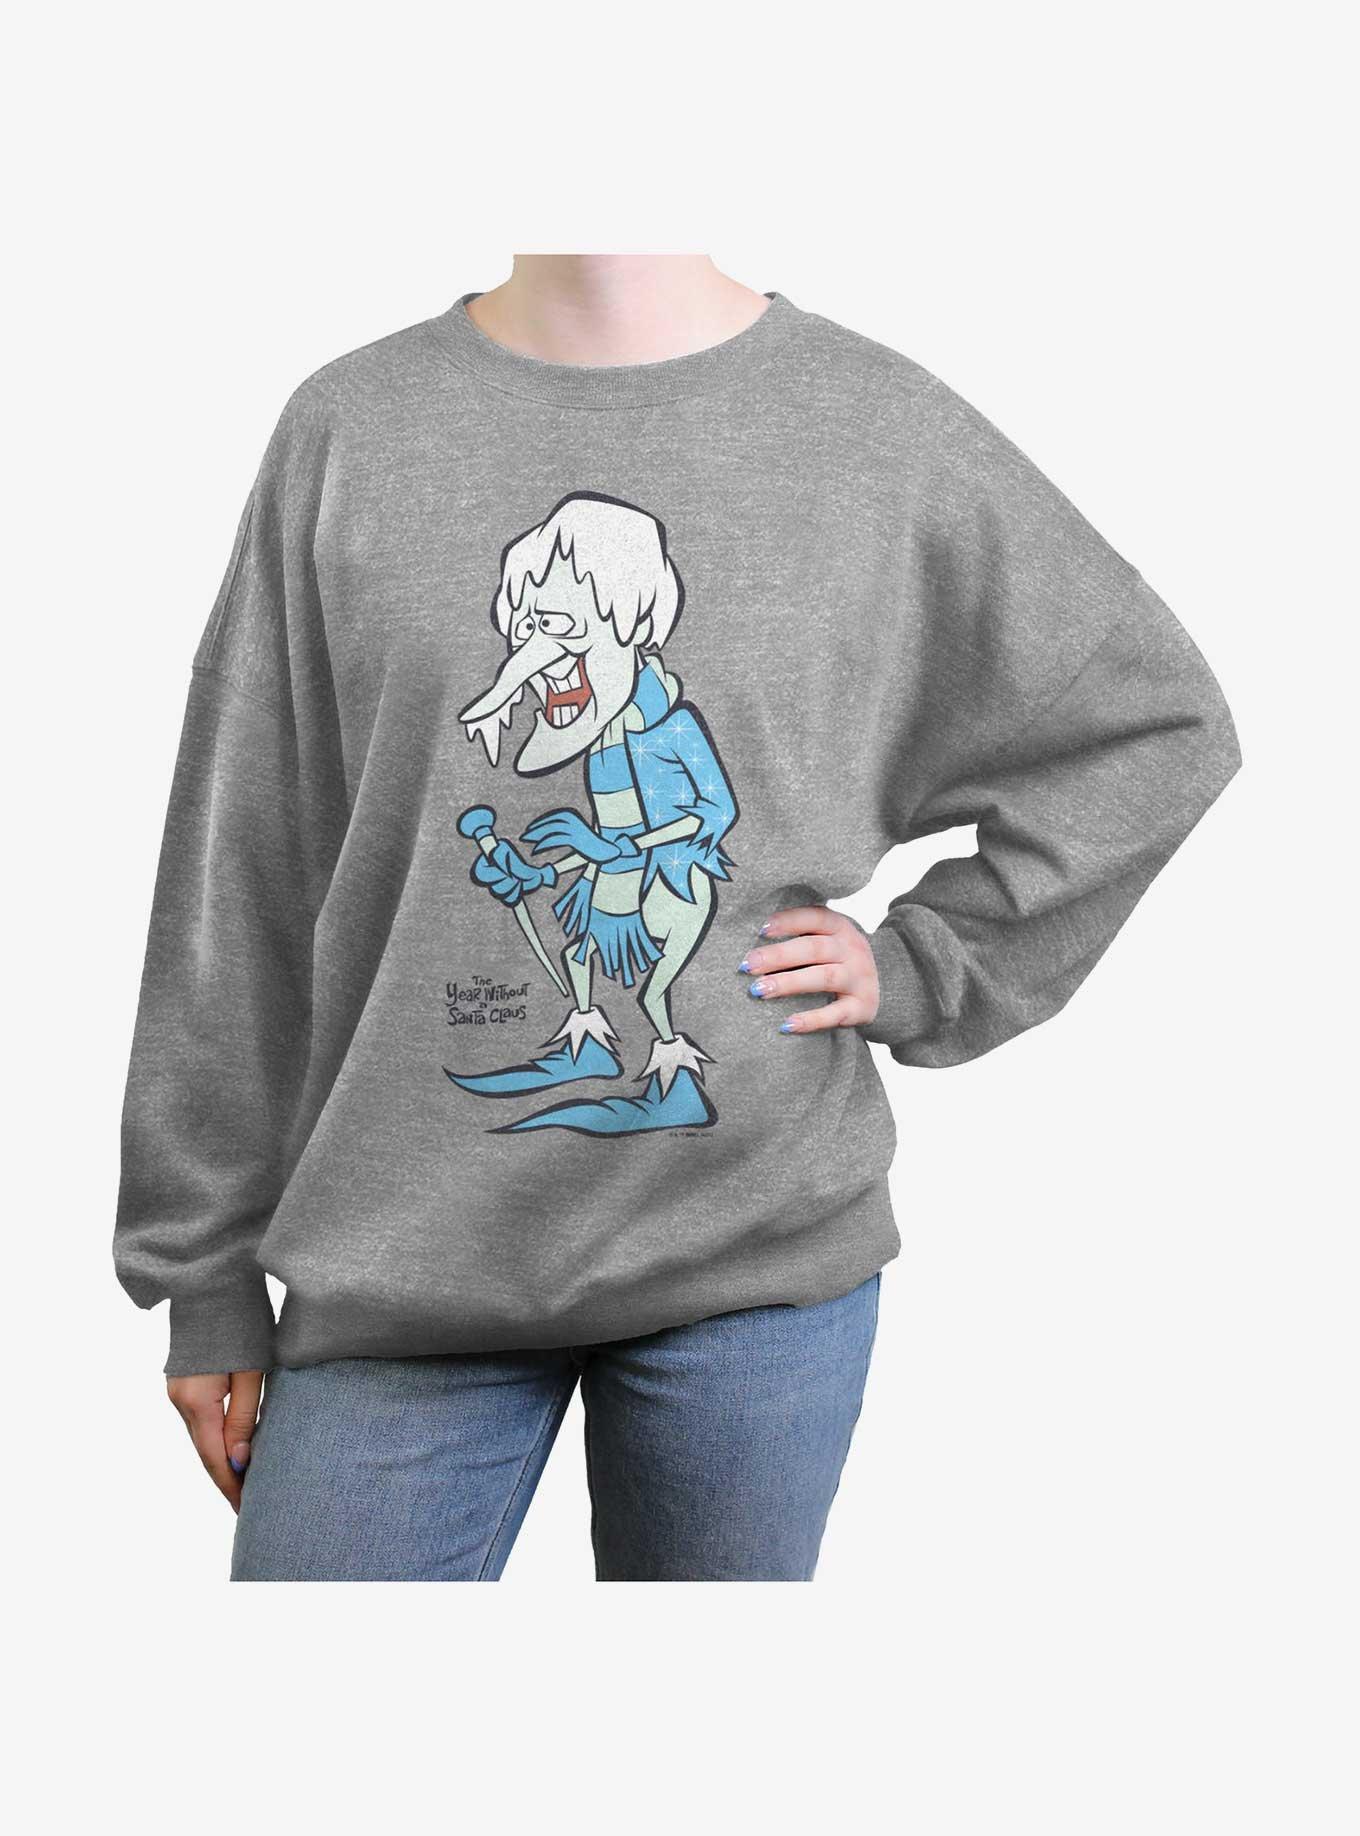 The Year Without a Santa Claus Snow Miser Girls Oversized Sweatshirt, HEATHER GR, hi-res